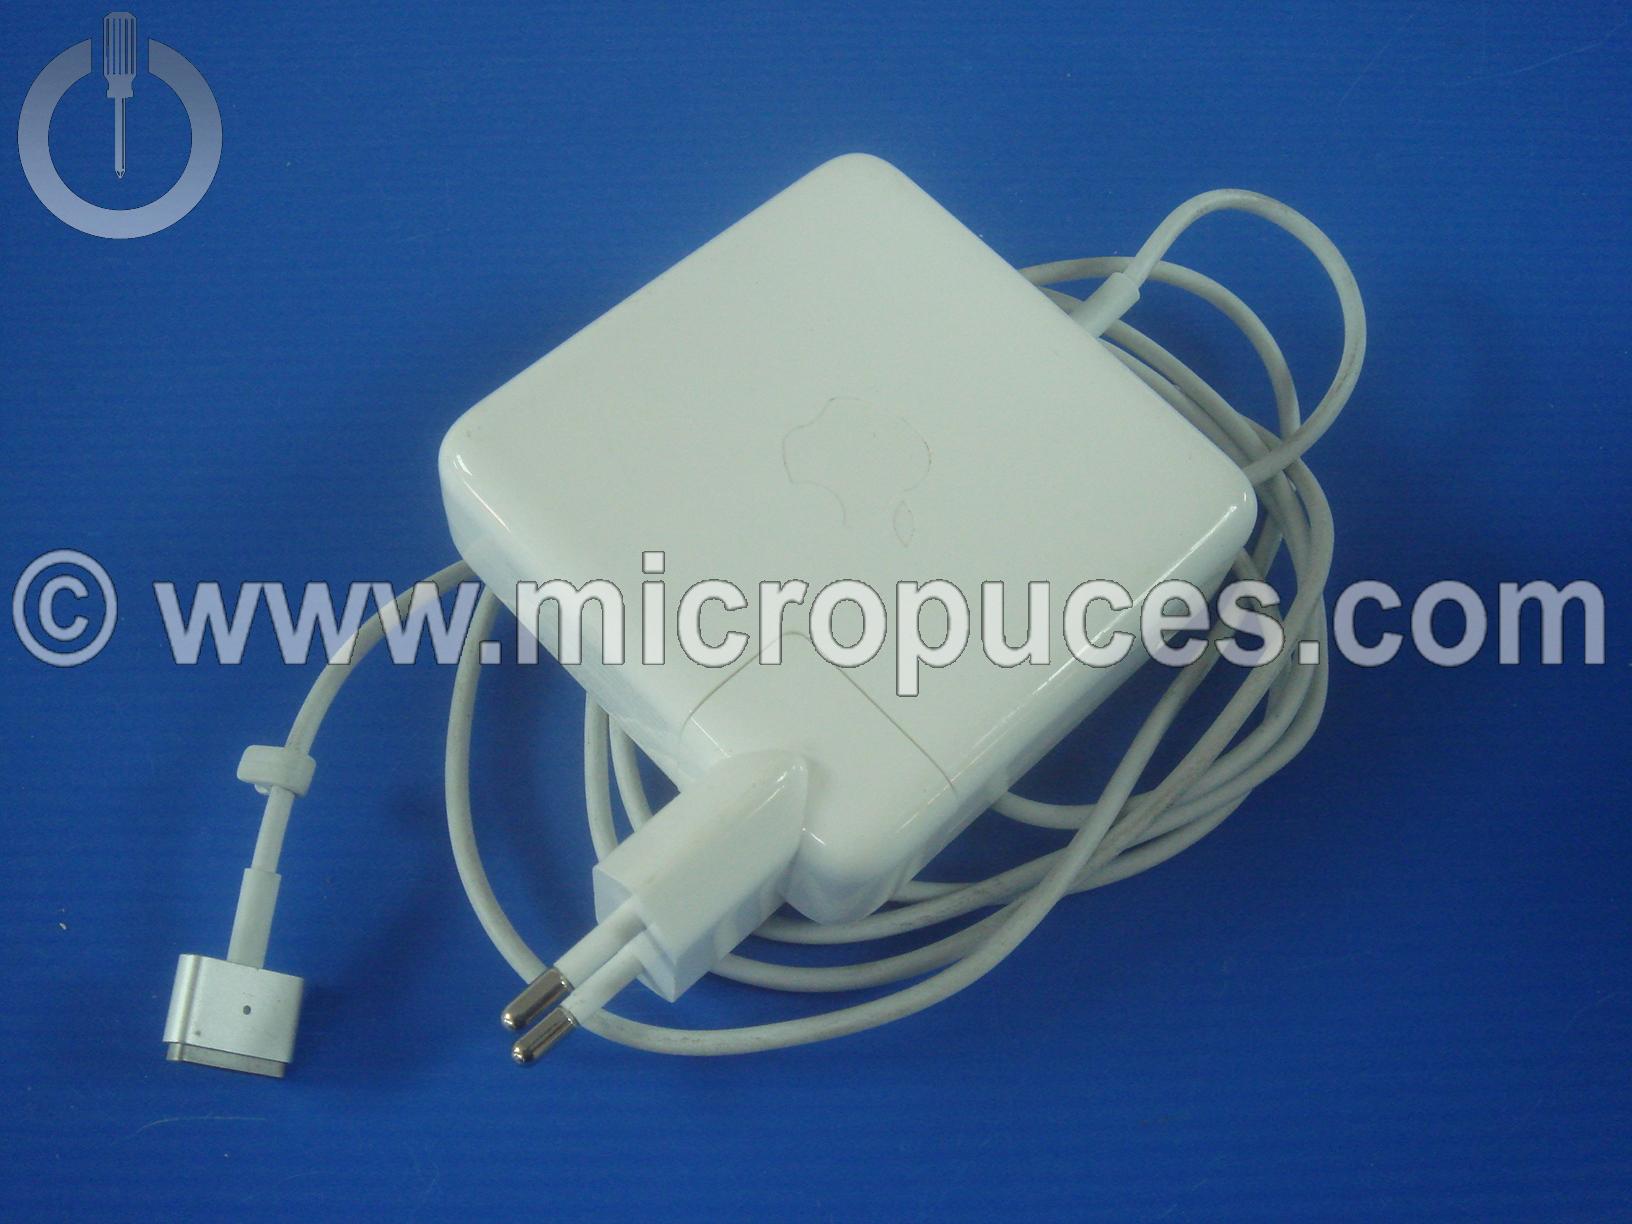 Chargeur MacBook MagSafe1 85W - Reconditionné